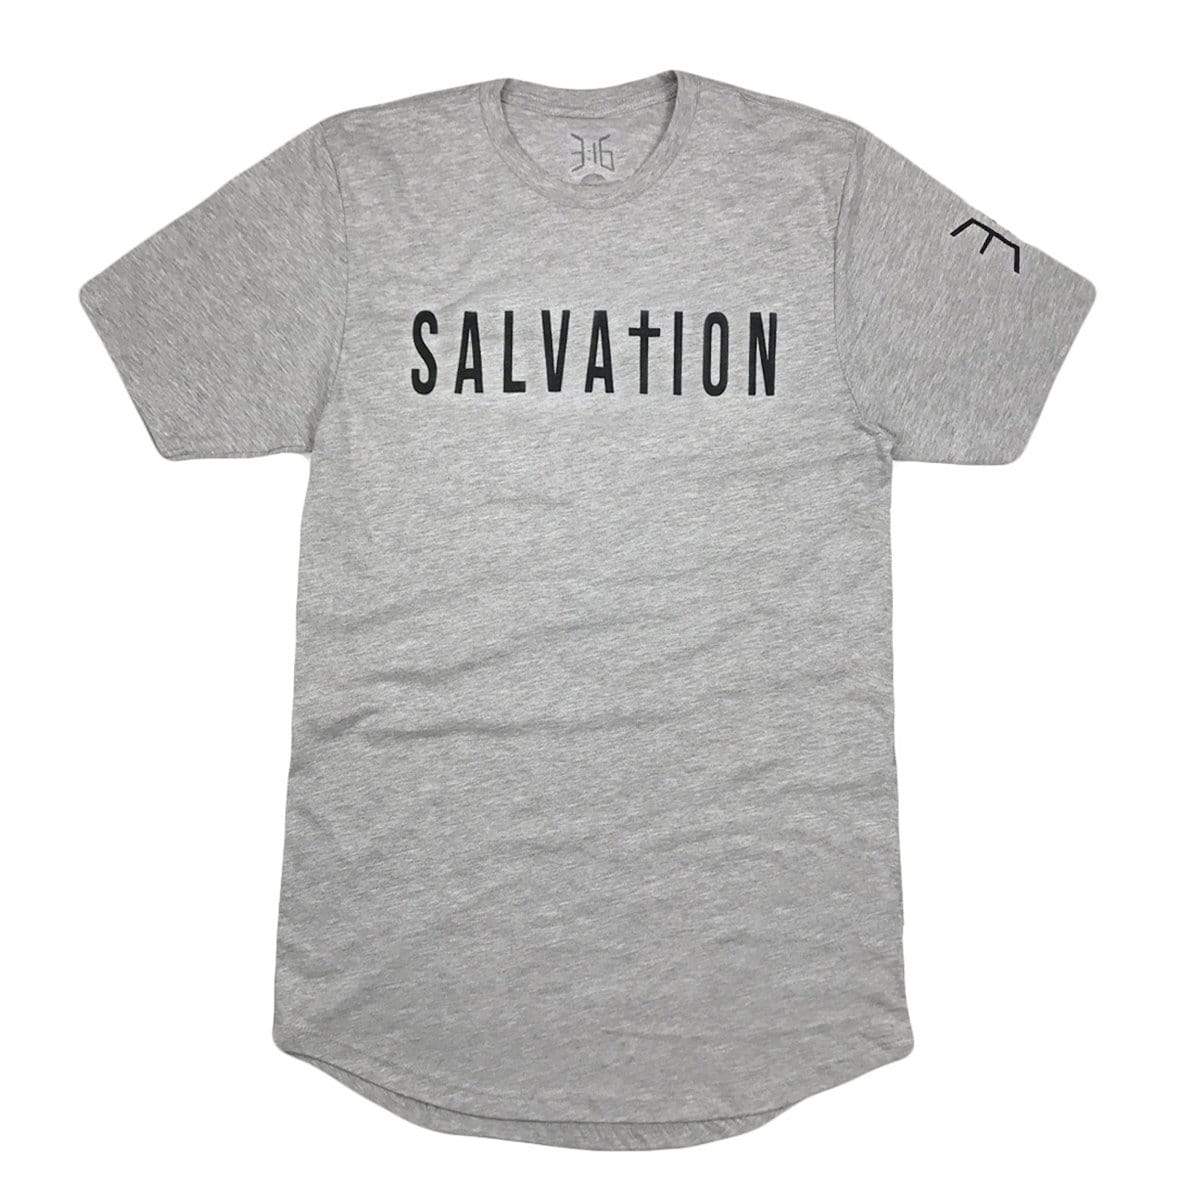 316collection Apparel Salvation Scoop Tee - Heather Gray